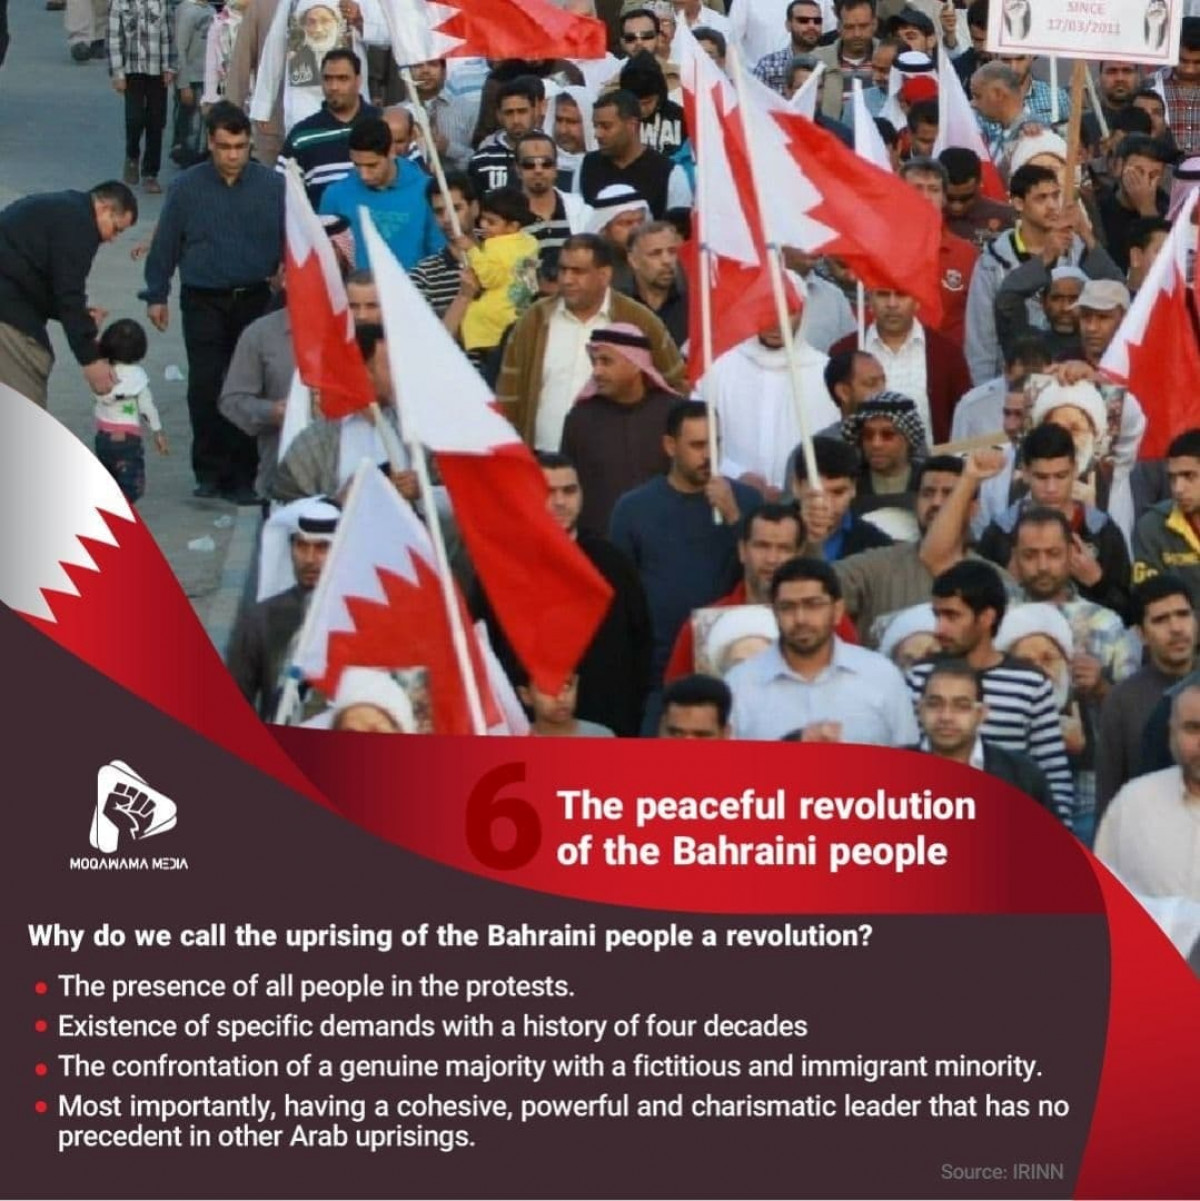 Why do we call the uprising of the Bahraini people a revolution?